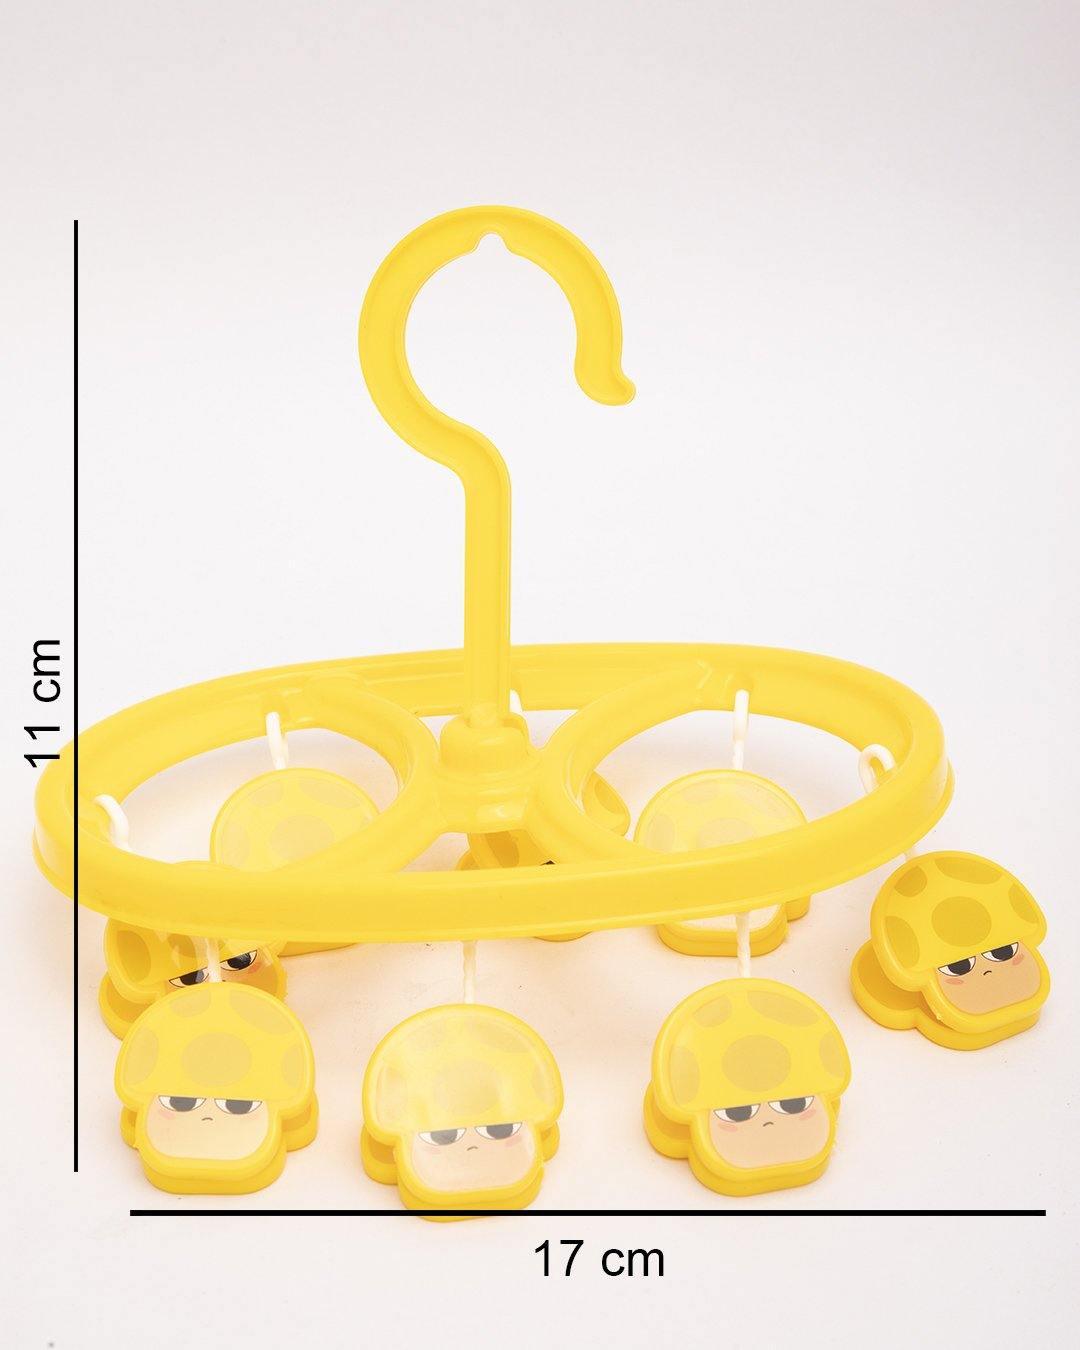 Clothes Hanger with 8 Pegs, Cloth Pegs, Yellow, Plastic - MARKET 99